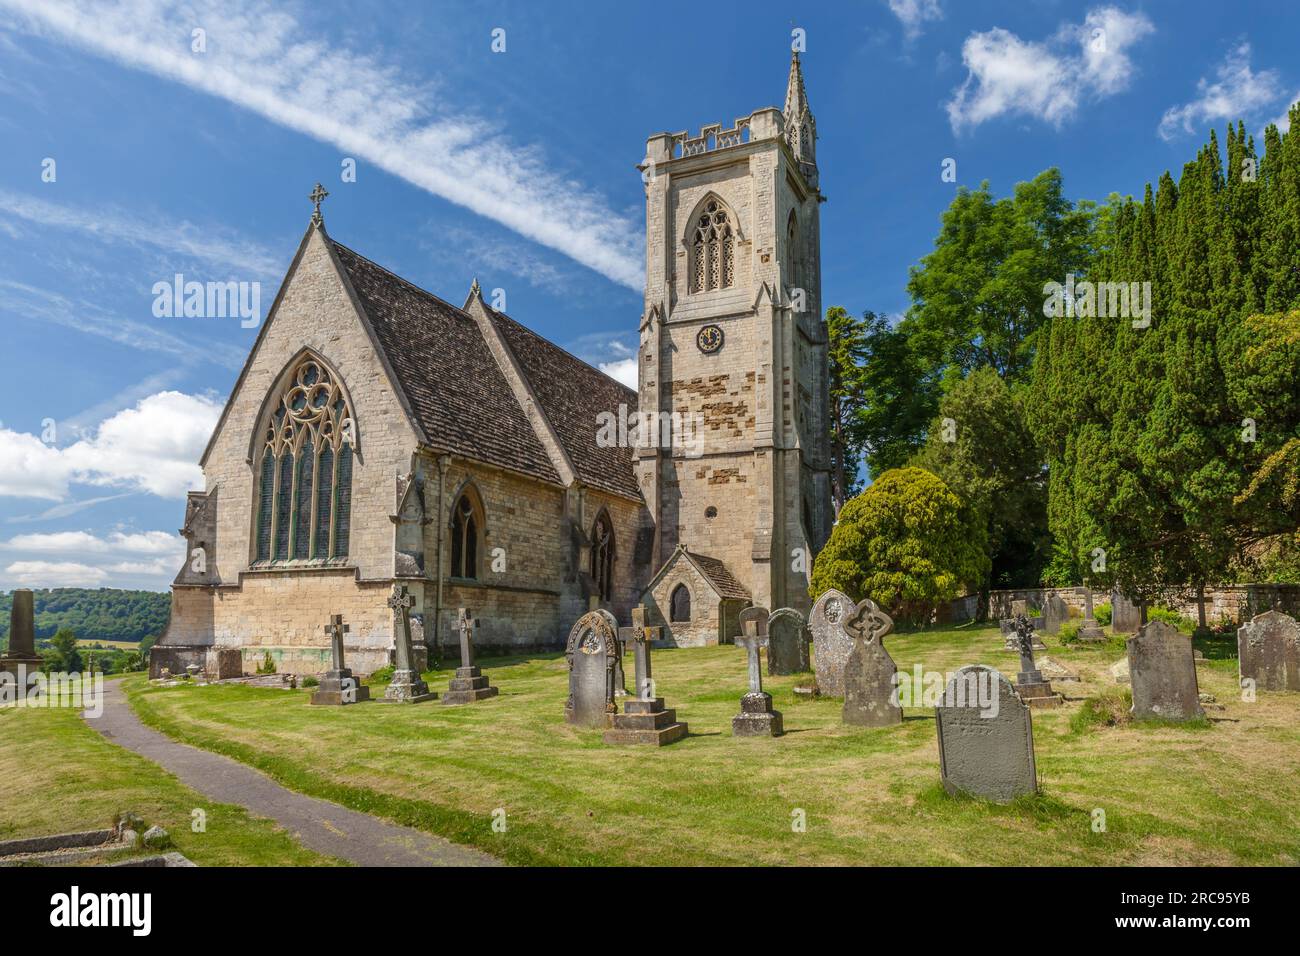 Geografie/Reise, Großbritannien, Gloucestershire, Uley, Dorfkirche in Uley, Cotswolds, ADDITIONAL-RIGHTS-CLEARANCE-INFO-NOT-AVAILABLE Stockfoto